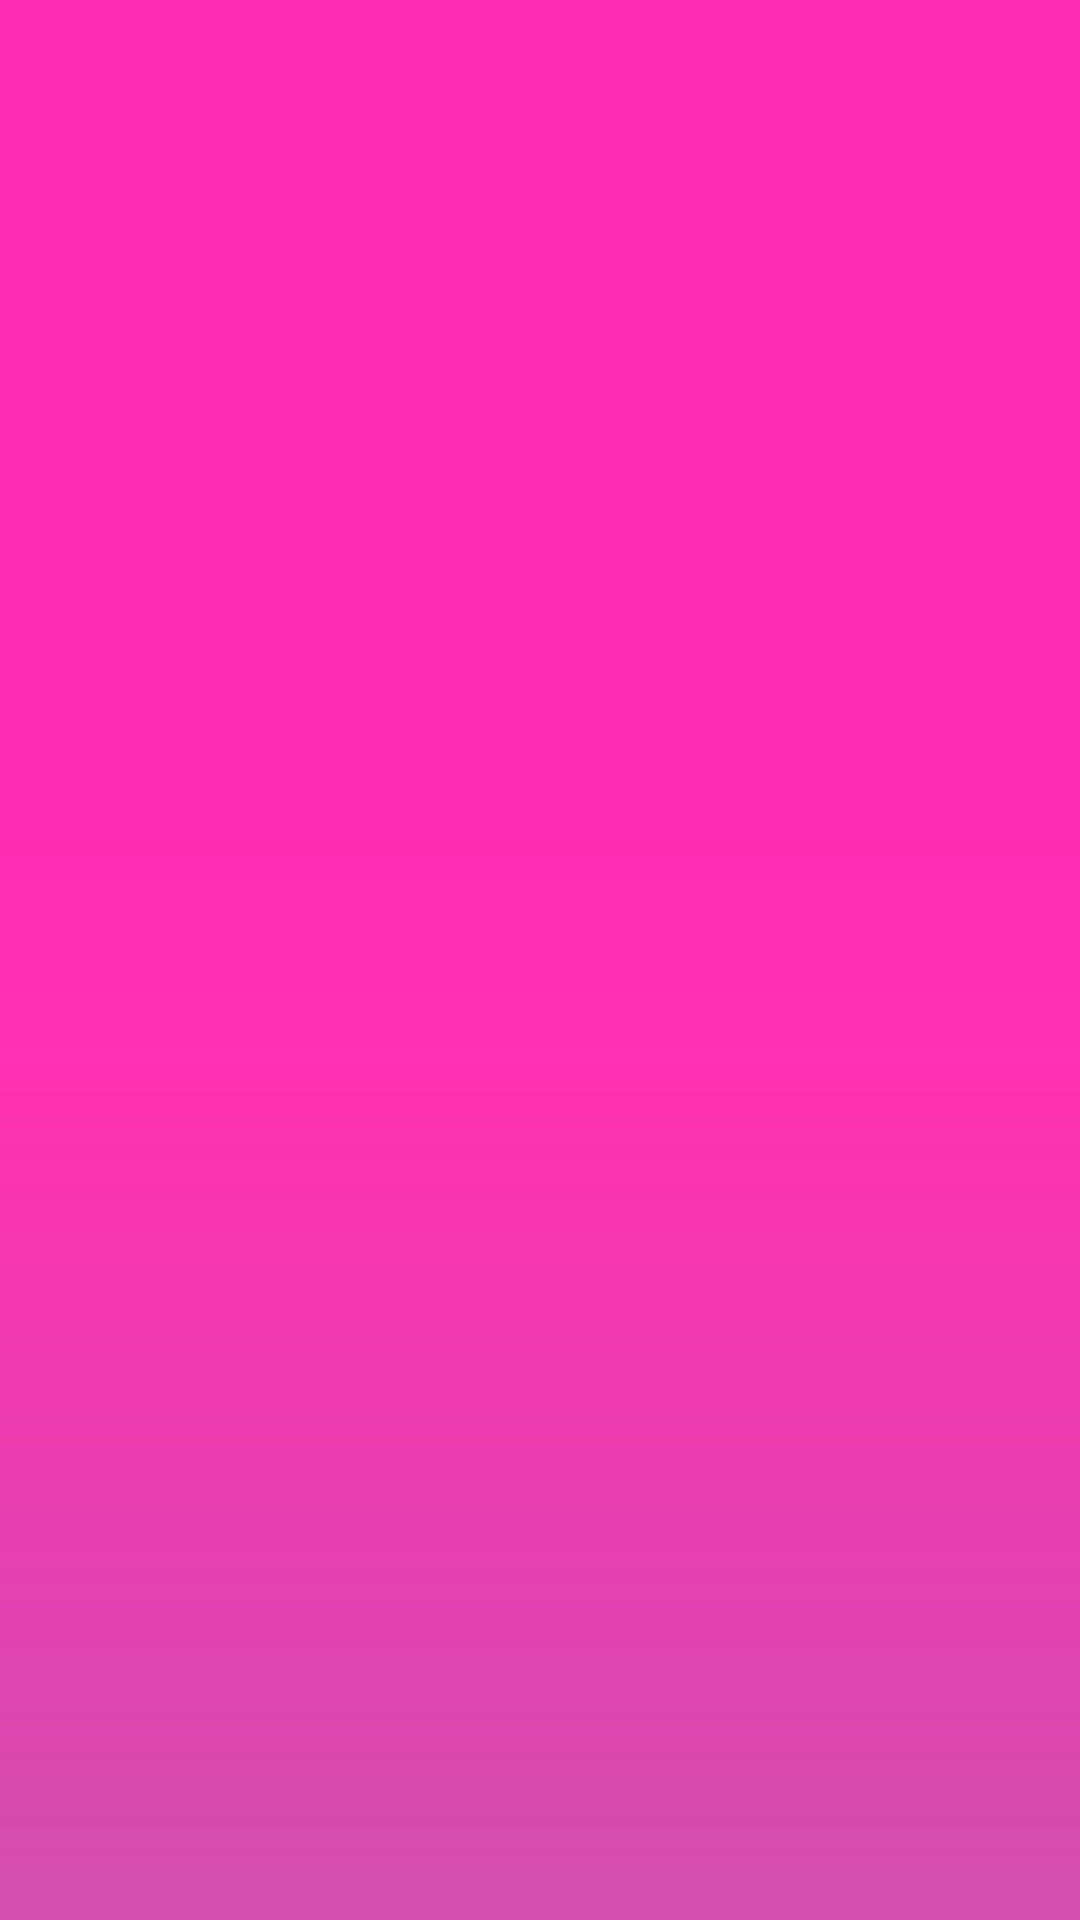 A Pink Background With A White Line